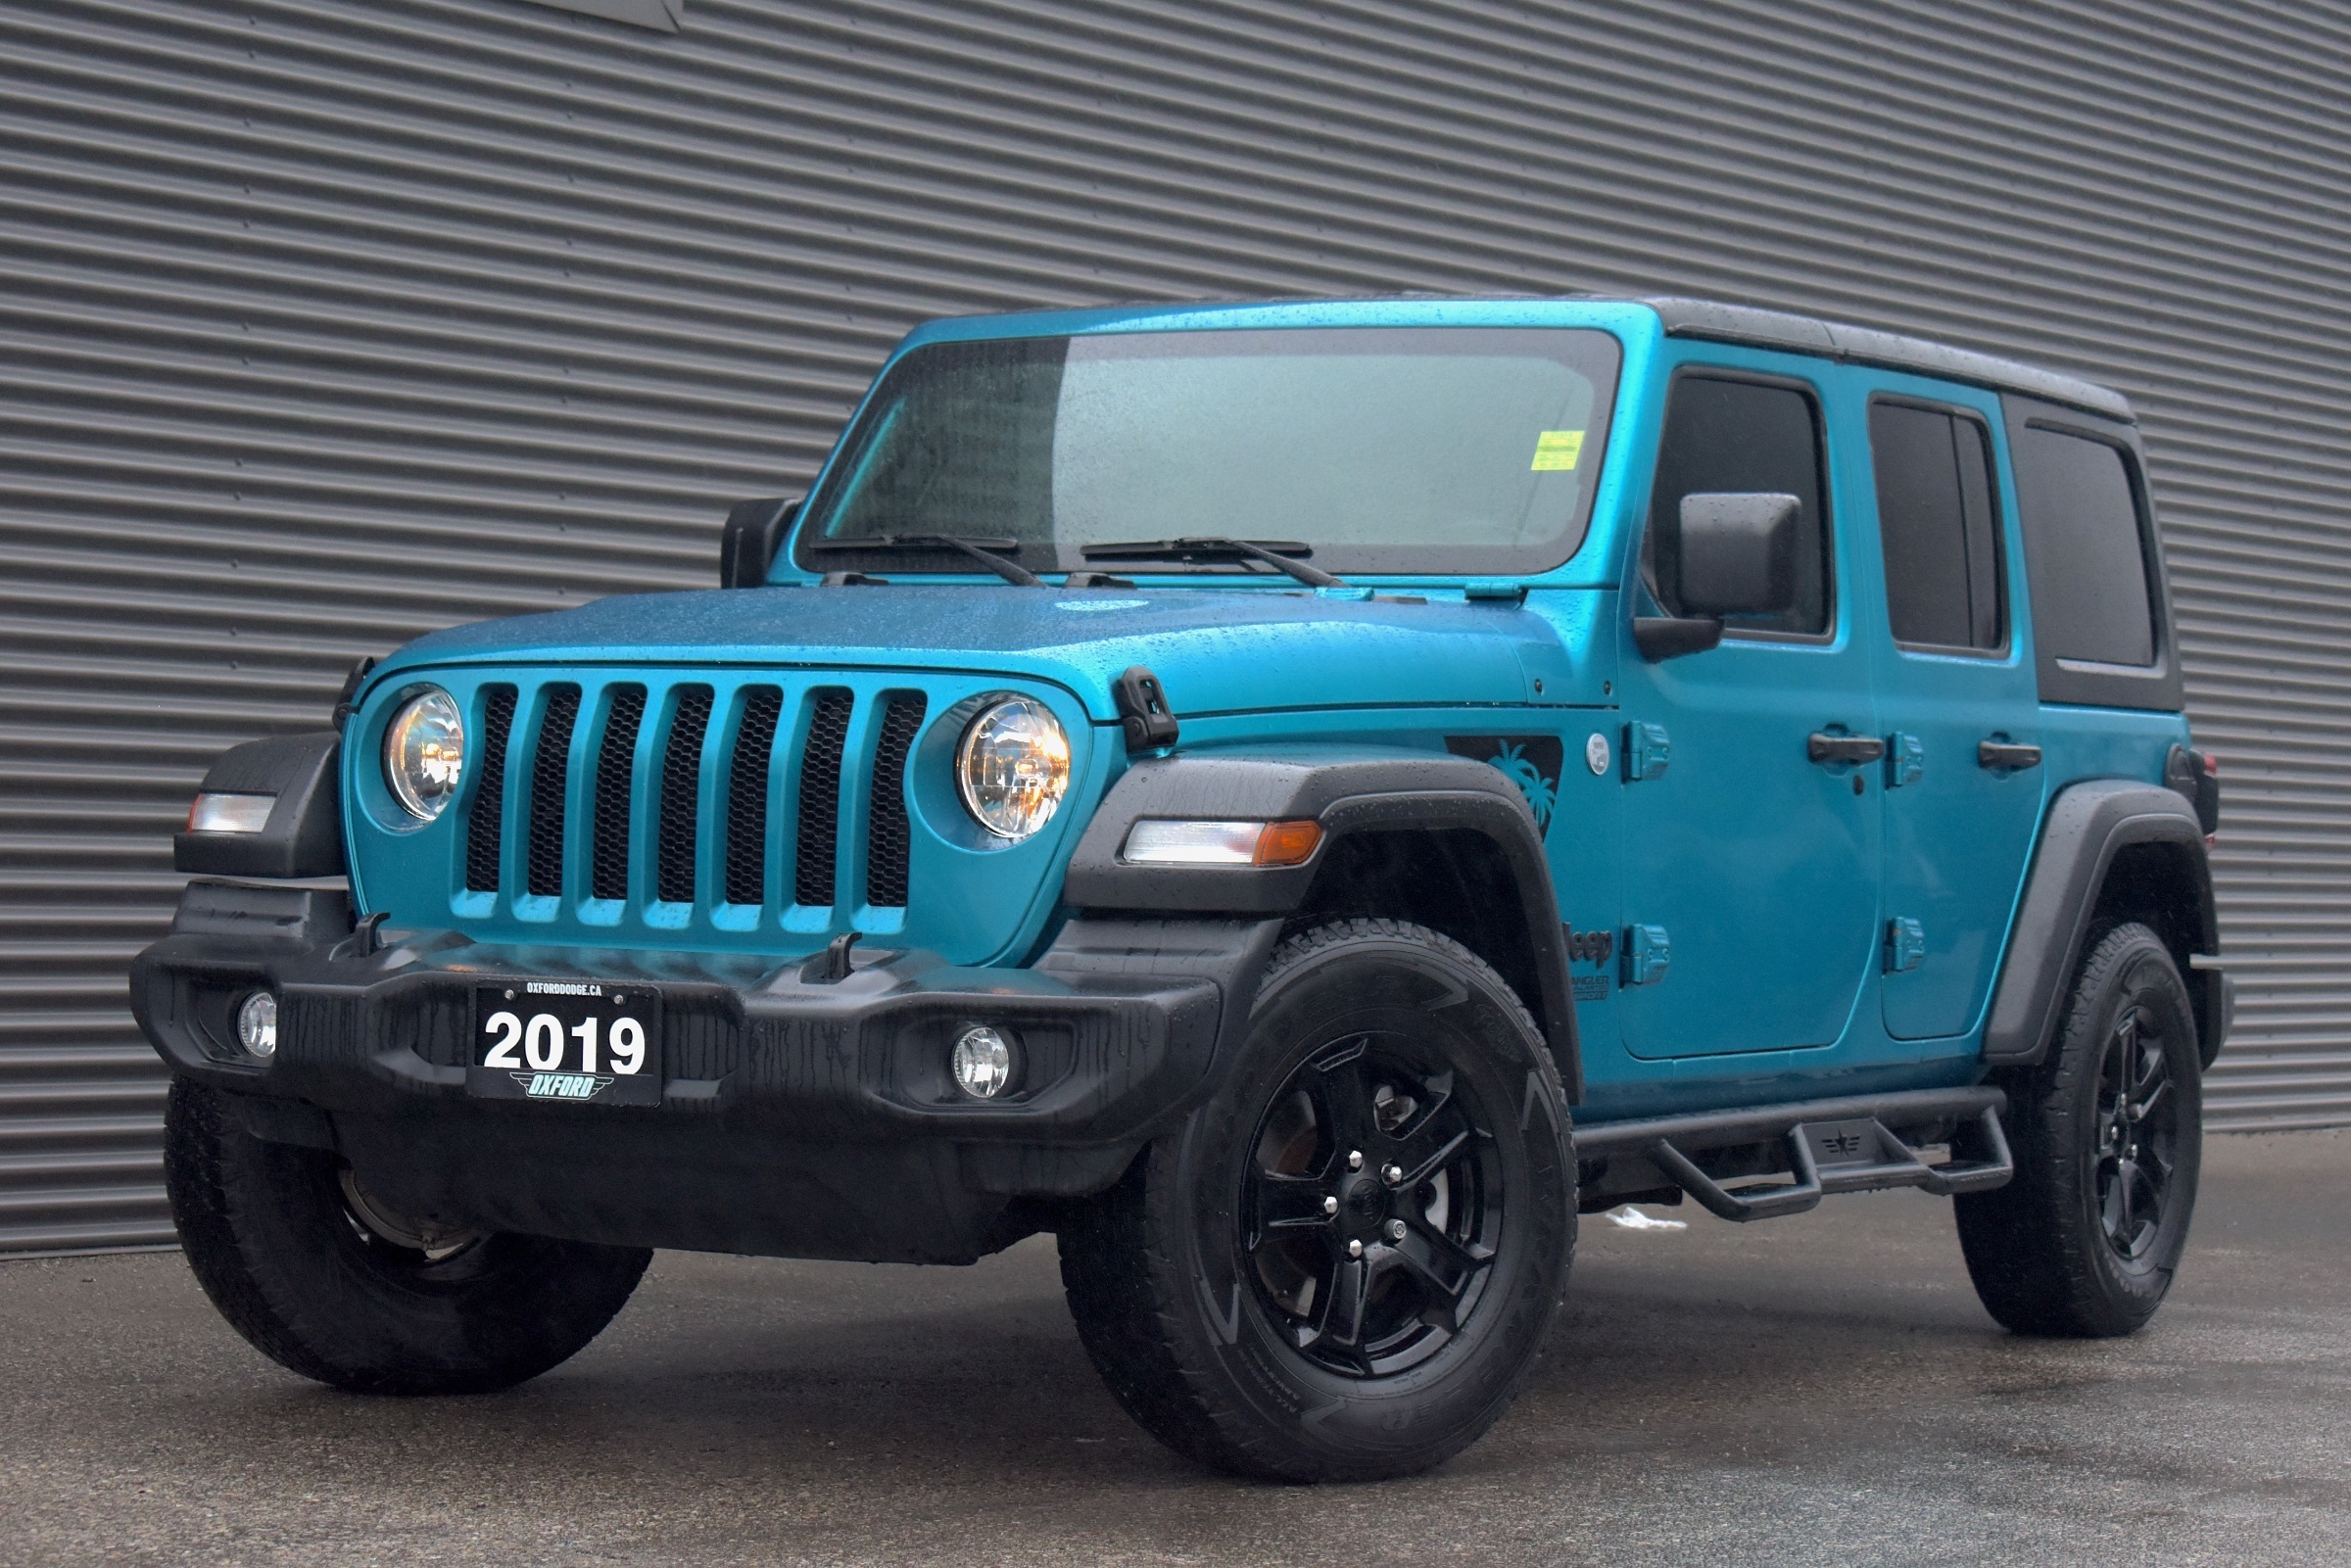 2019 Jeep WRANGLER UNLIMITED Sport Bikini Pearl Exterior Colour, One Owner, Cle